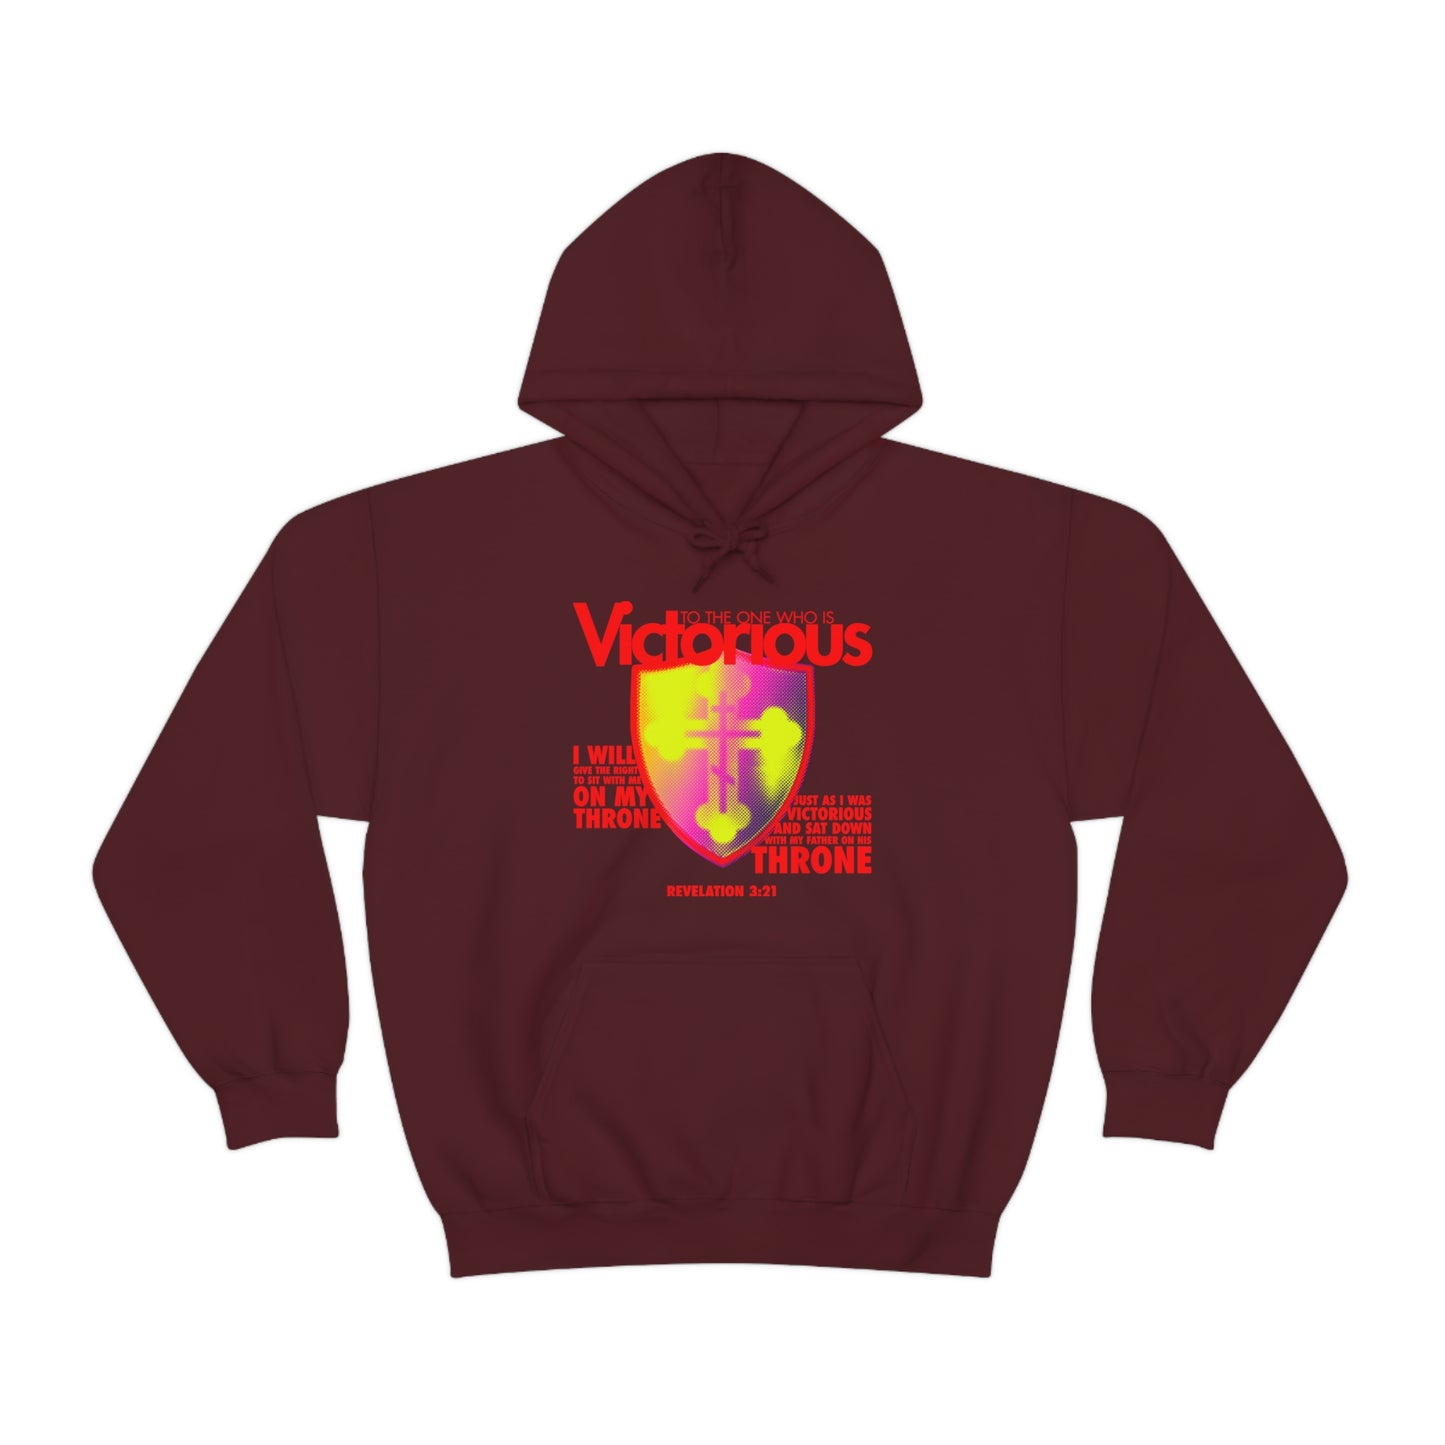 To The One Who Is Victorious No. 5 | Orthodox Christian Hoodie / Hooded Sweatshirt